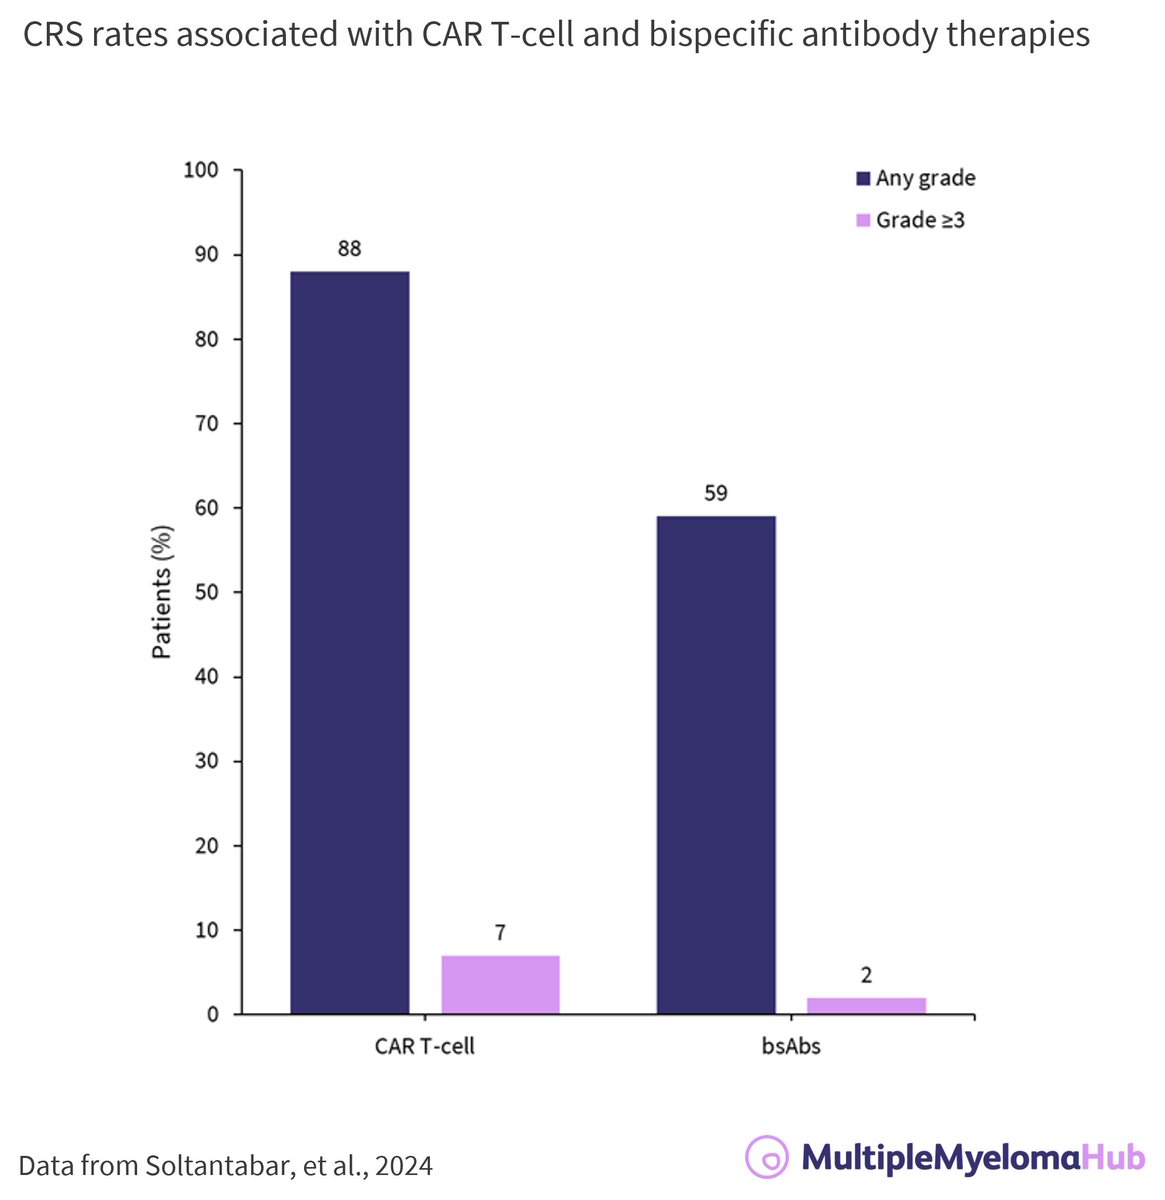 Could modality and administration route of BCMA-directed immunotherapies impact incidence and rate of CRS in patients with relapsed/refractory #MultipleMyeloma? Read our article to learn the latest data! loom.ly/xUEI2us #mmsm #myeloma #CRS